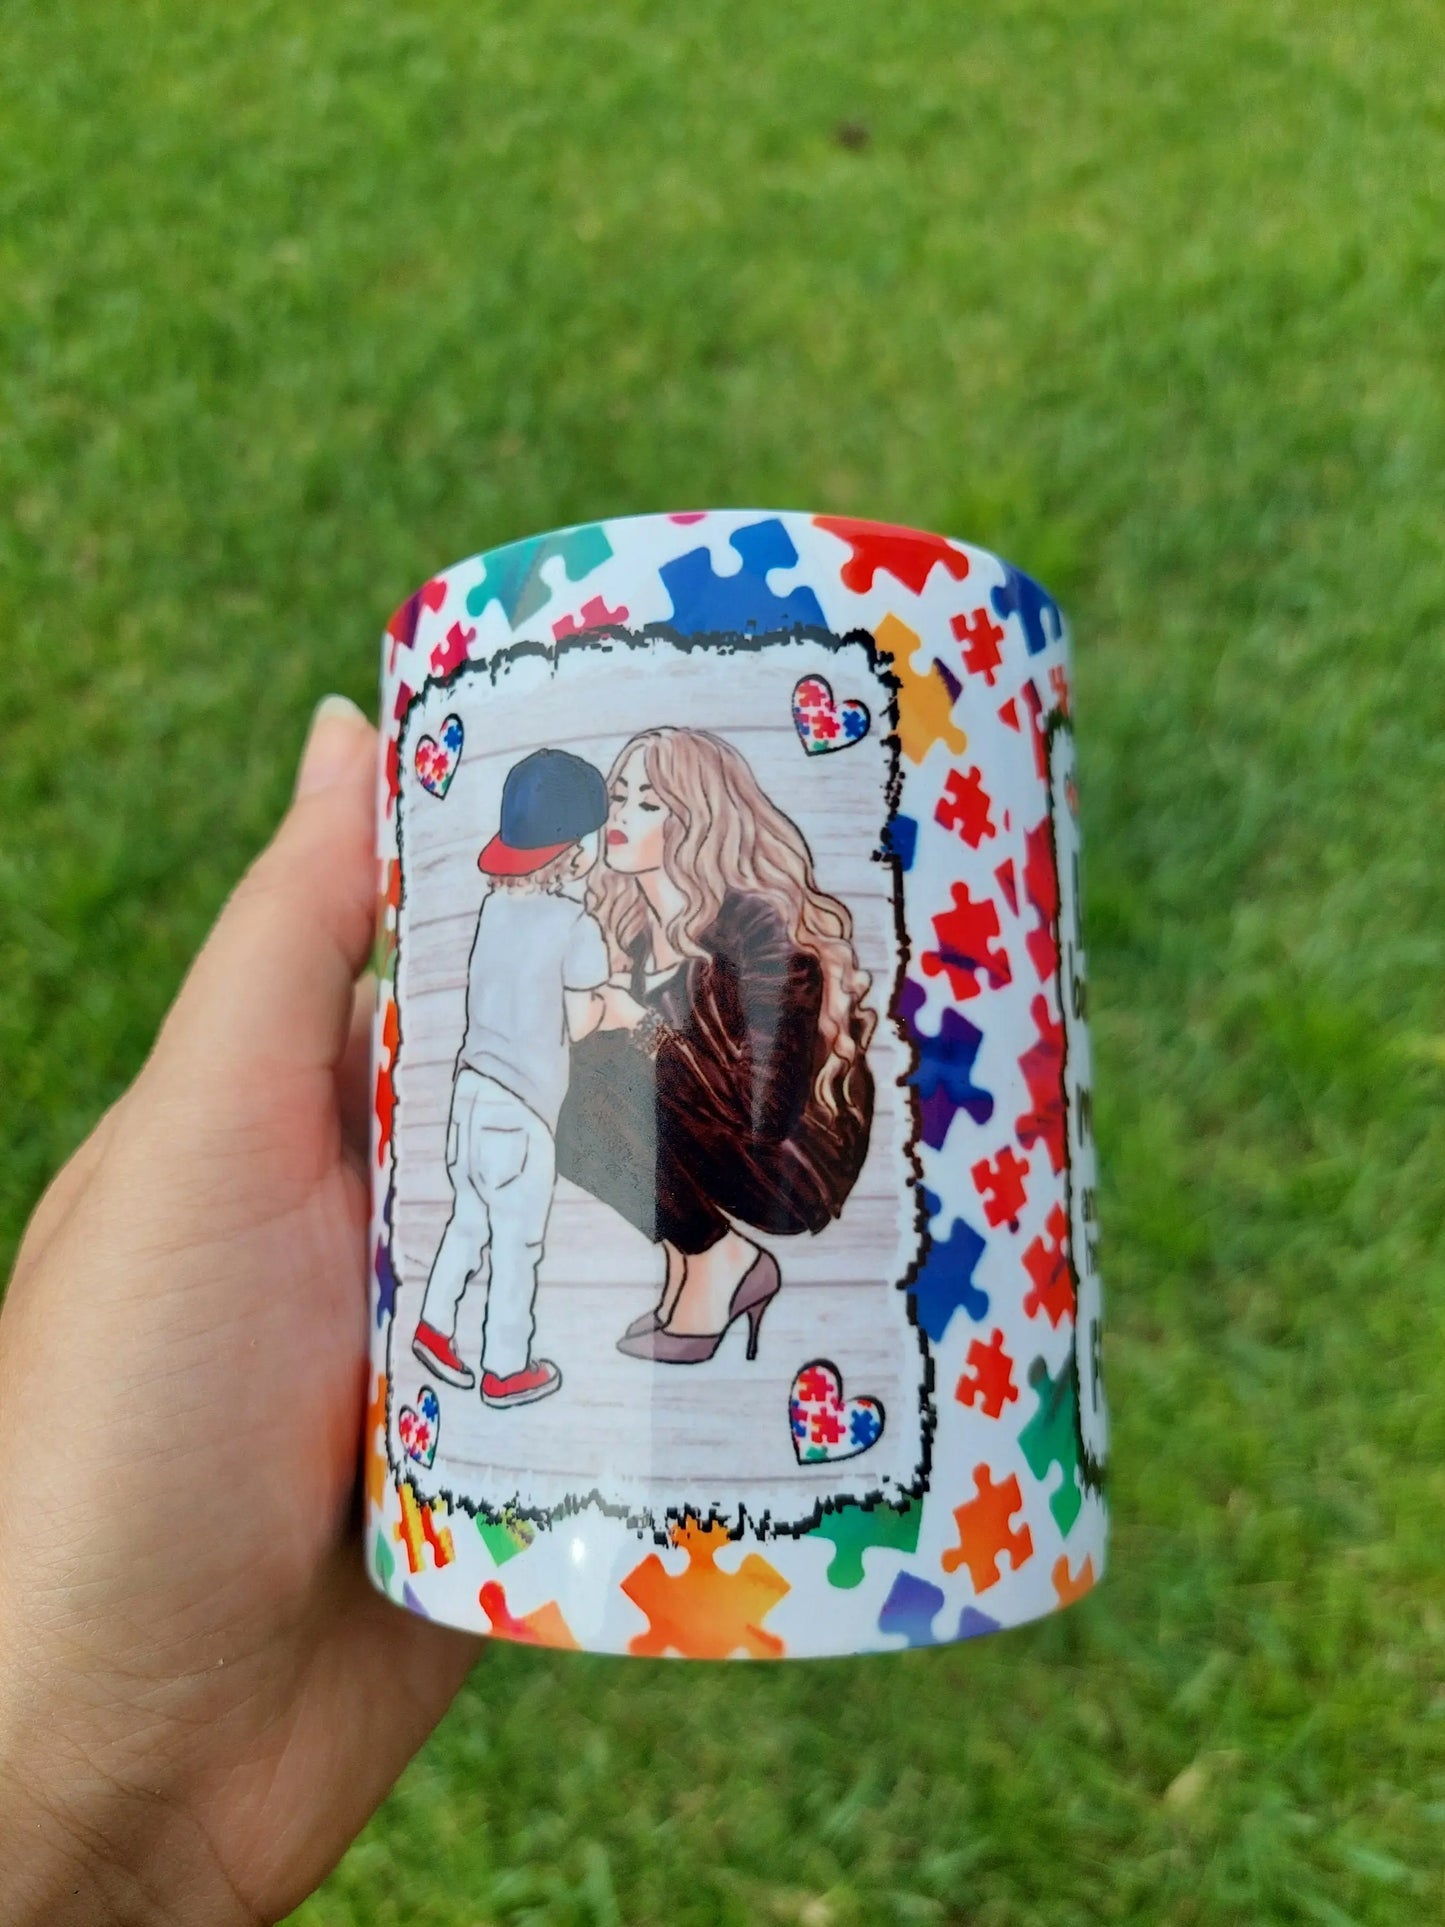 The Love Between A Mother and Her Son Mug